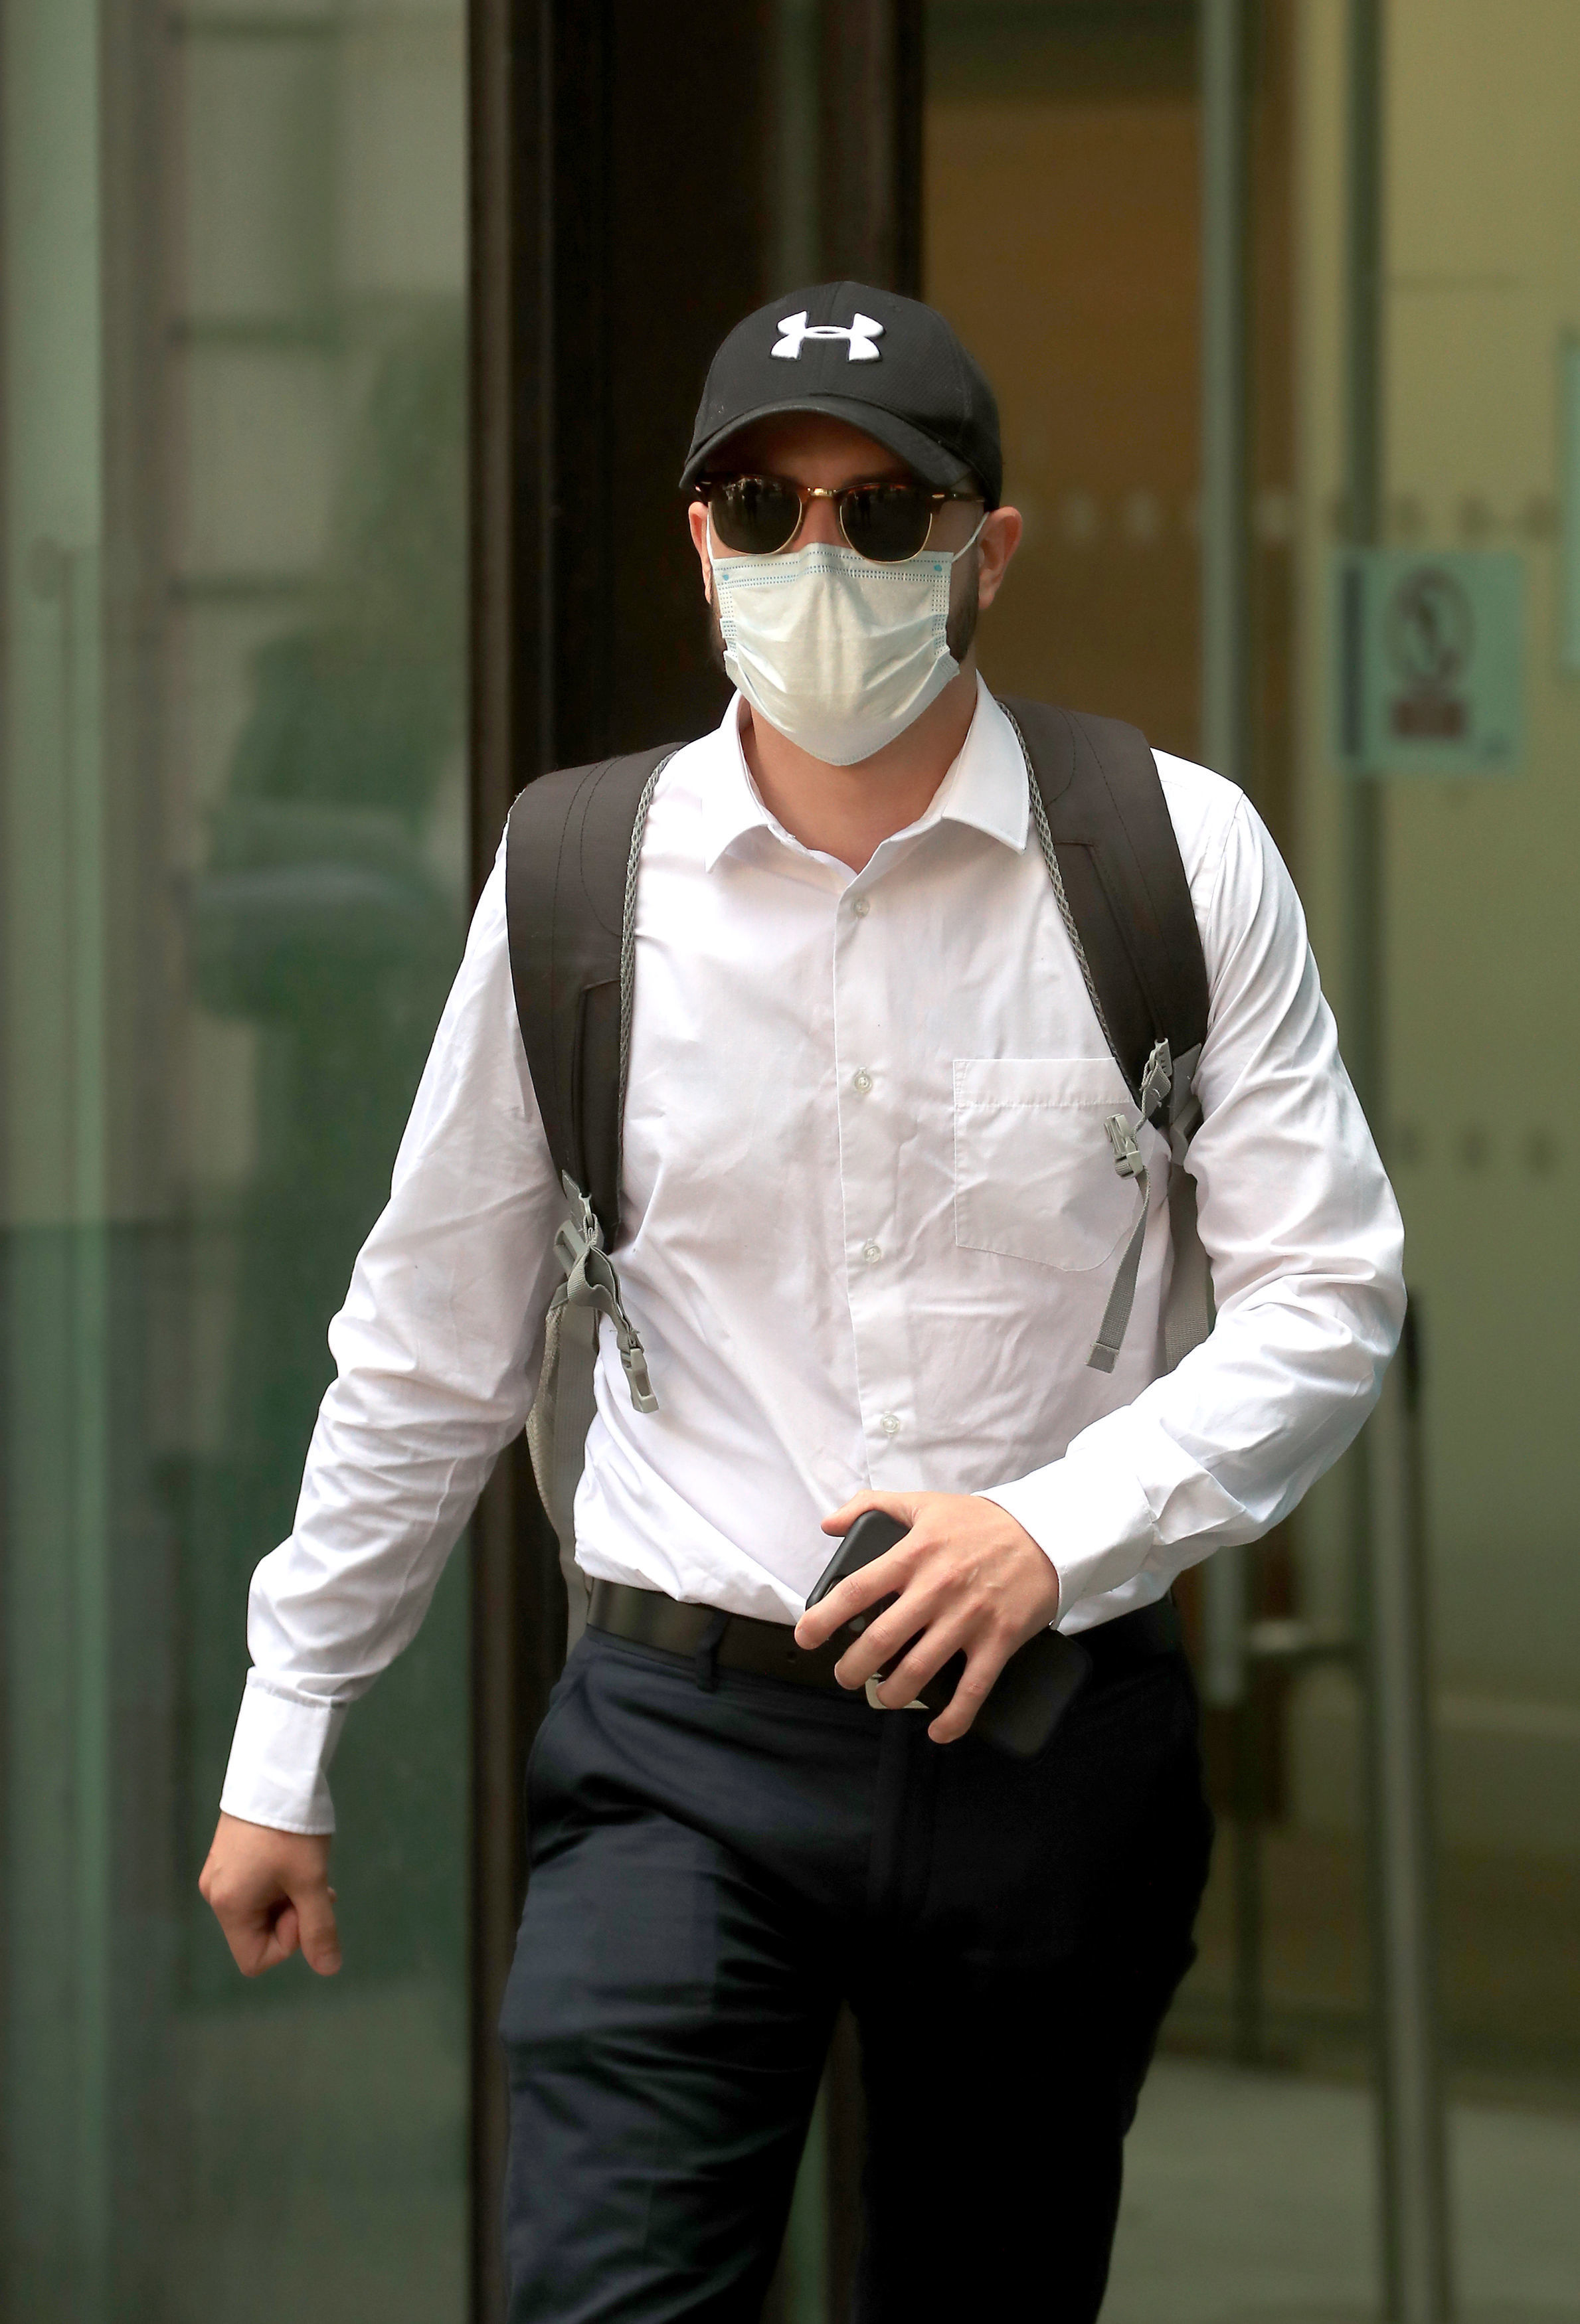 Pc Jamie Lewis arrives at Westminster Magistrates Court, London, where he is appearing charged with misconduct in a public office. It is alleged that Pc Deniz Jaffer and Pc Jamie Lewis shared pictures of a double murder scene of sisters Nicole Smallman